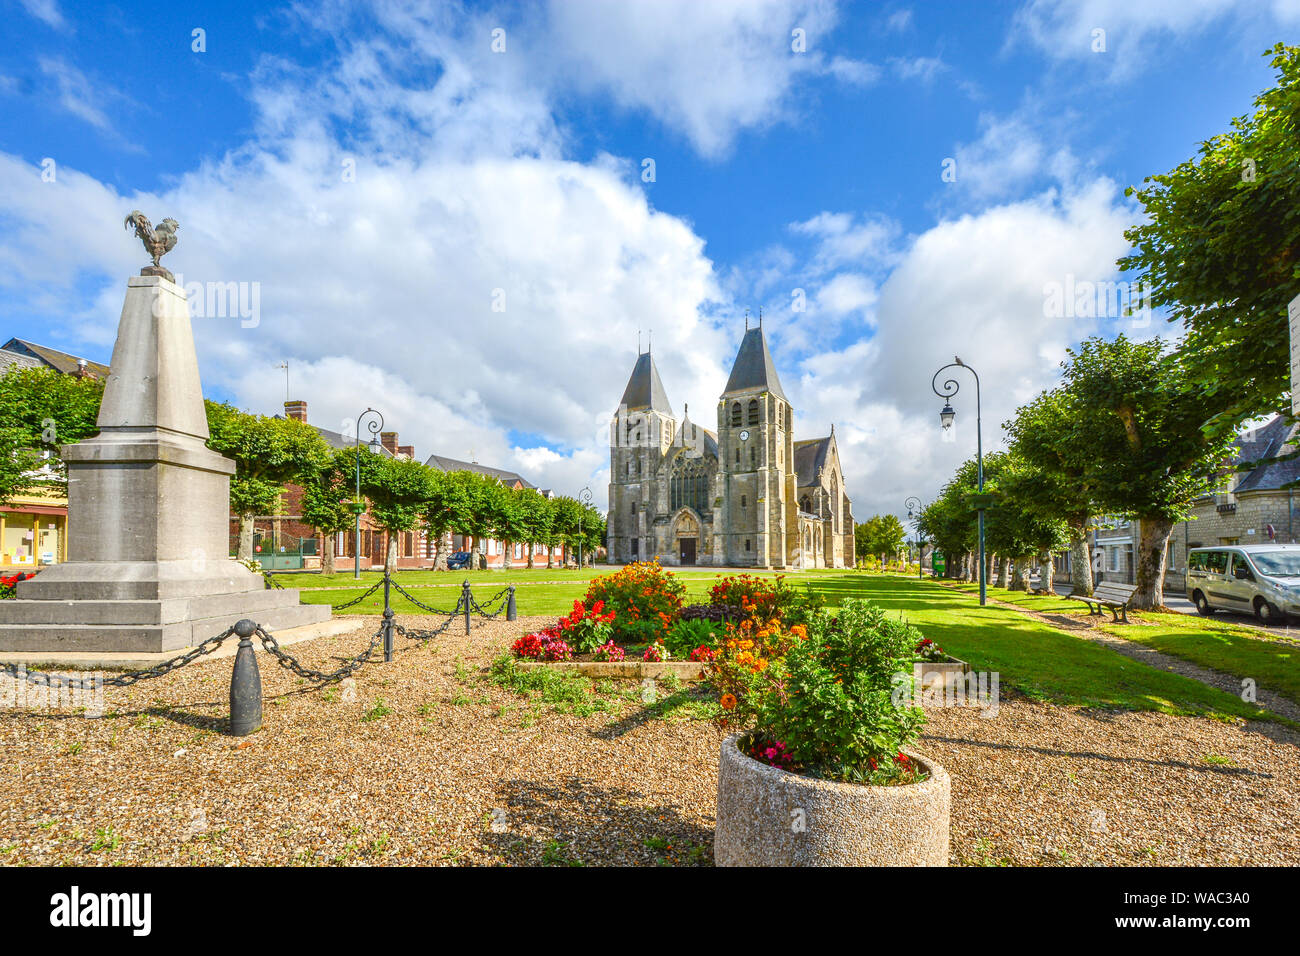 Collégiale Notre-Dame d'Écouis, a medieval catholic church with a statue of a rooster in front in the French city of Ecouis in Normandy France. Stock Photo